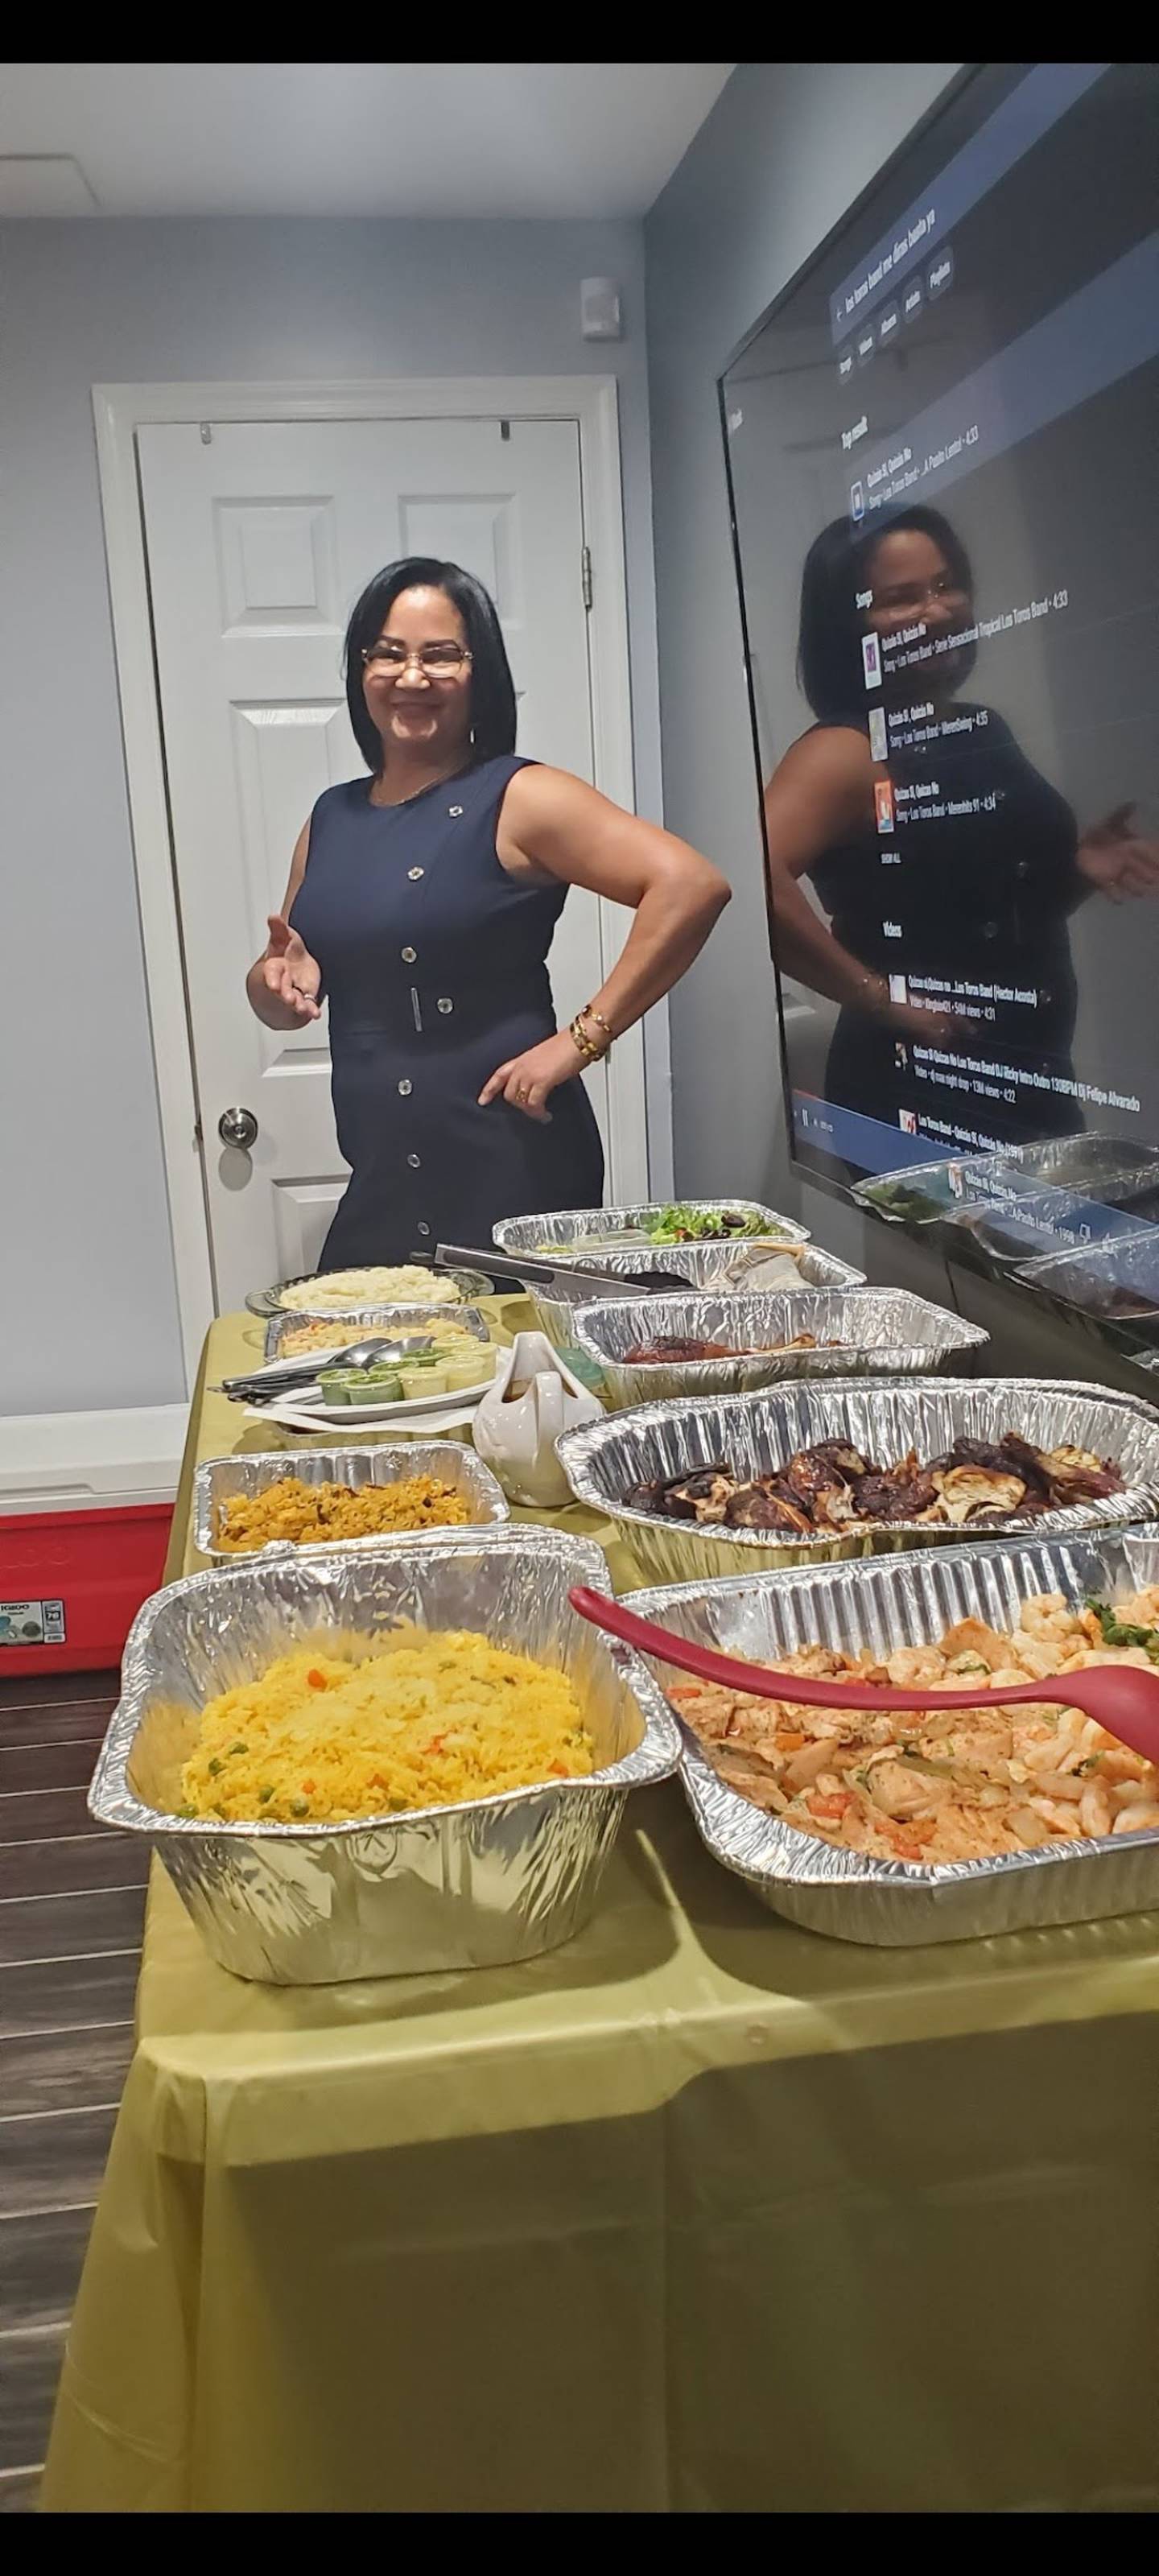 A woman with glasses and a dark dress gives a thumbs up. On a table in front of her is a variety of food, served in large aluminum pans.